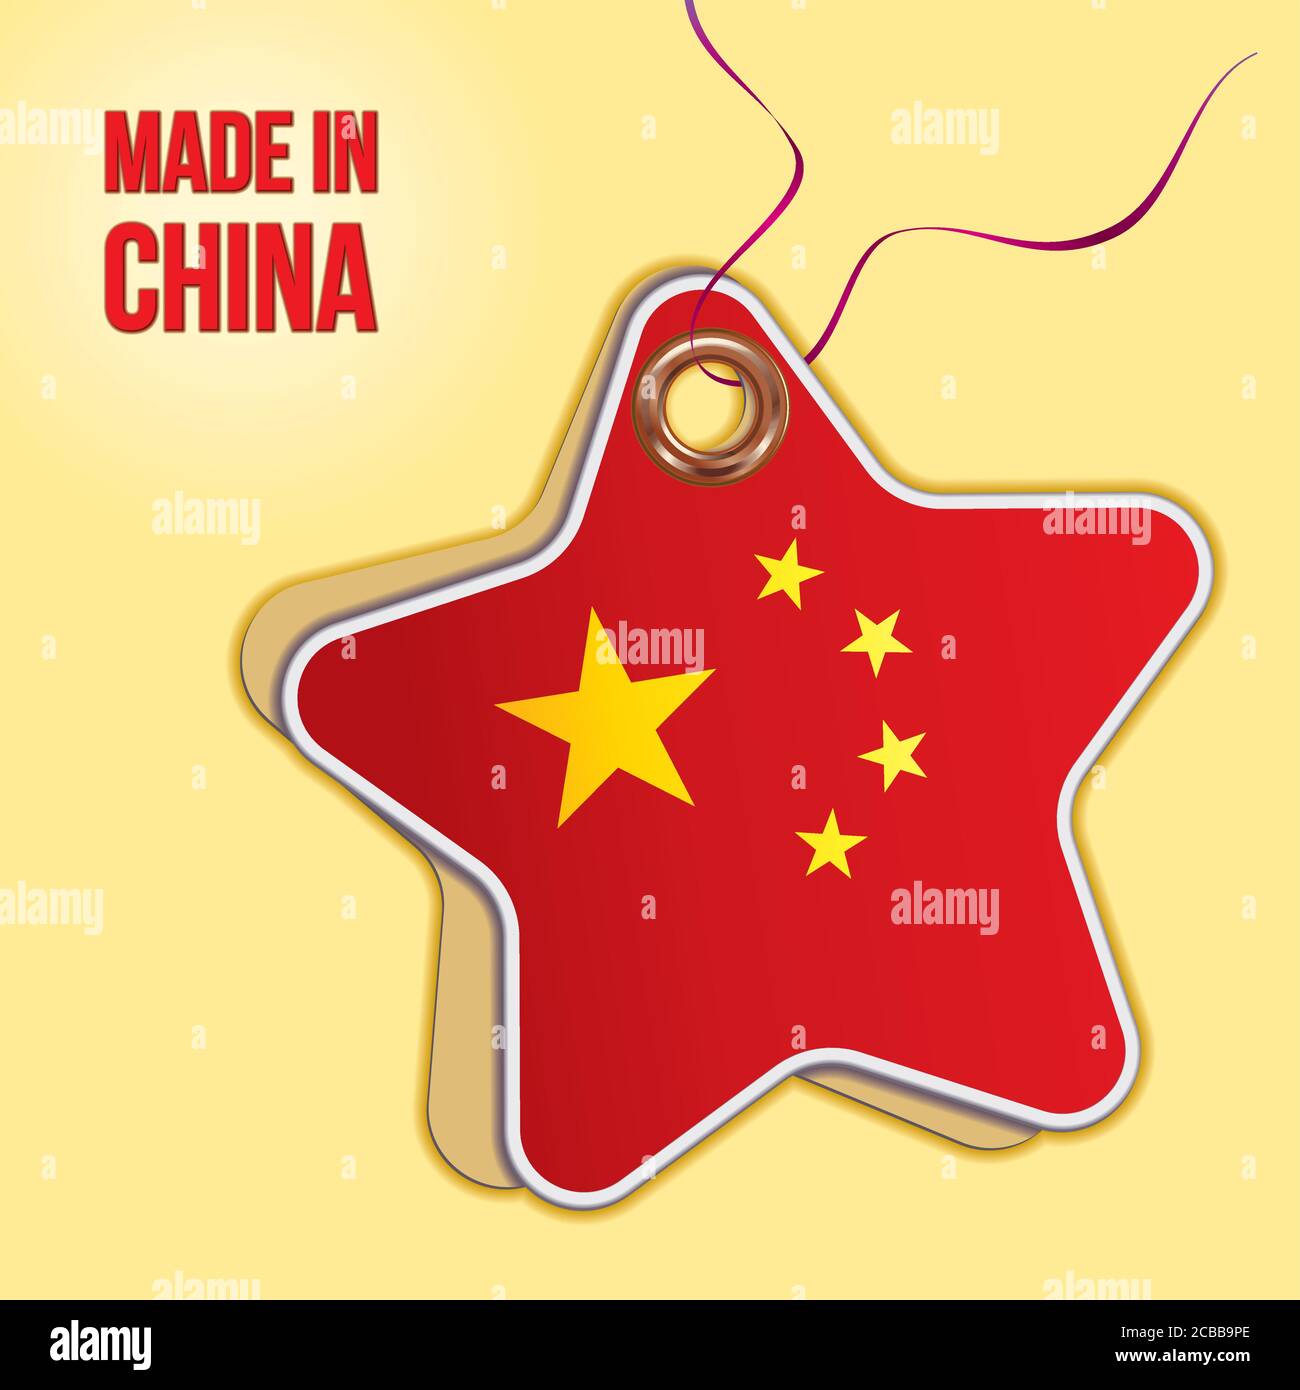 Made in China. Flag of China, People's Republic of China. Label price tag in the form of a paper star. vector image for any of your projects. Stock Vector